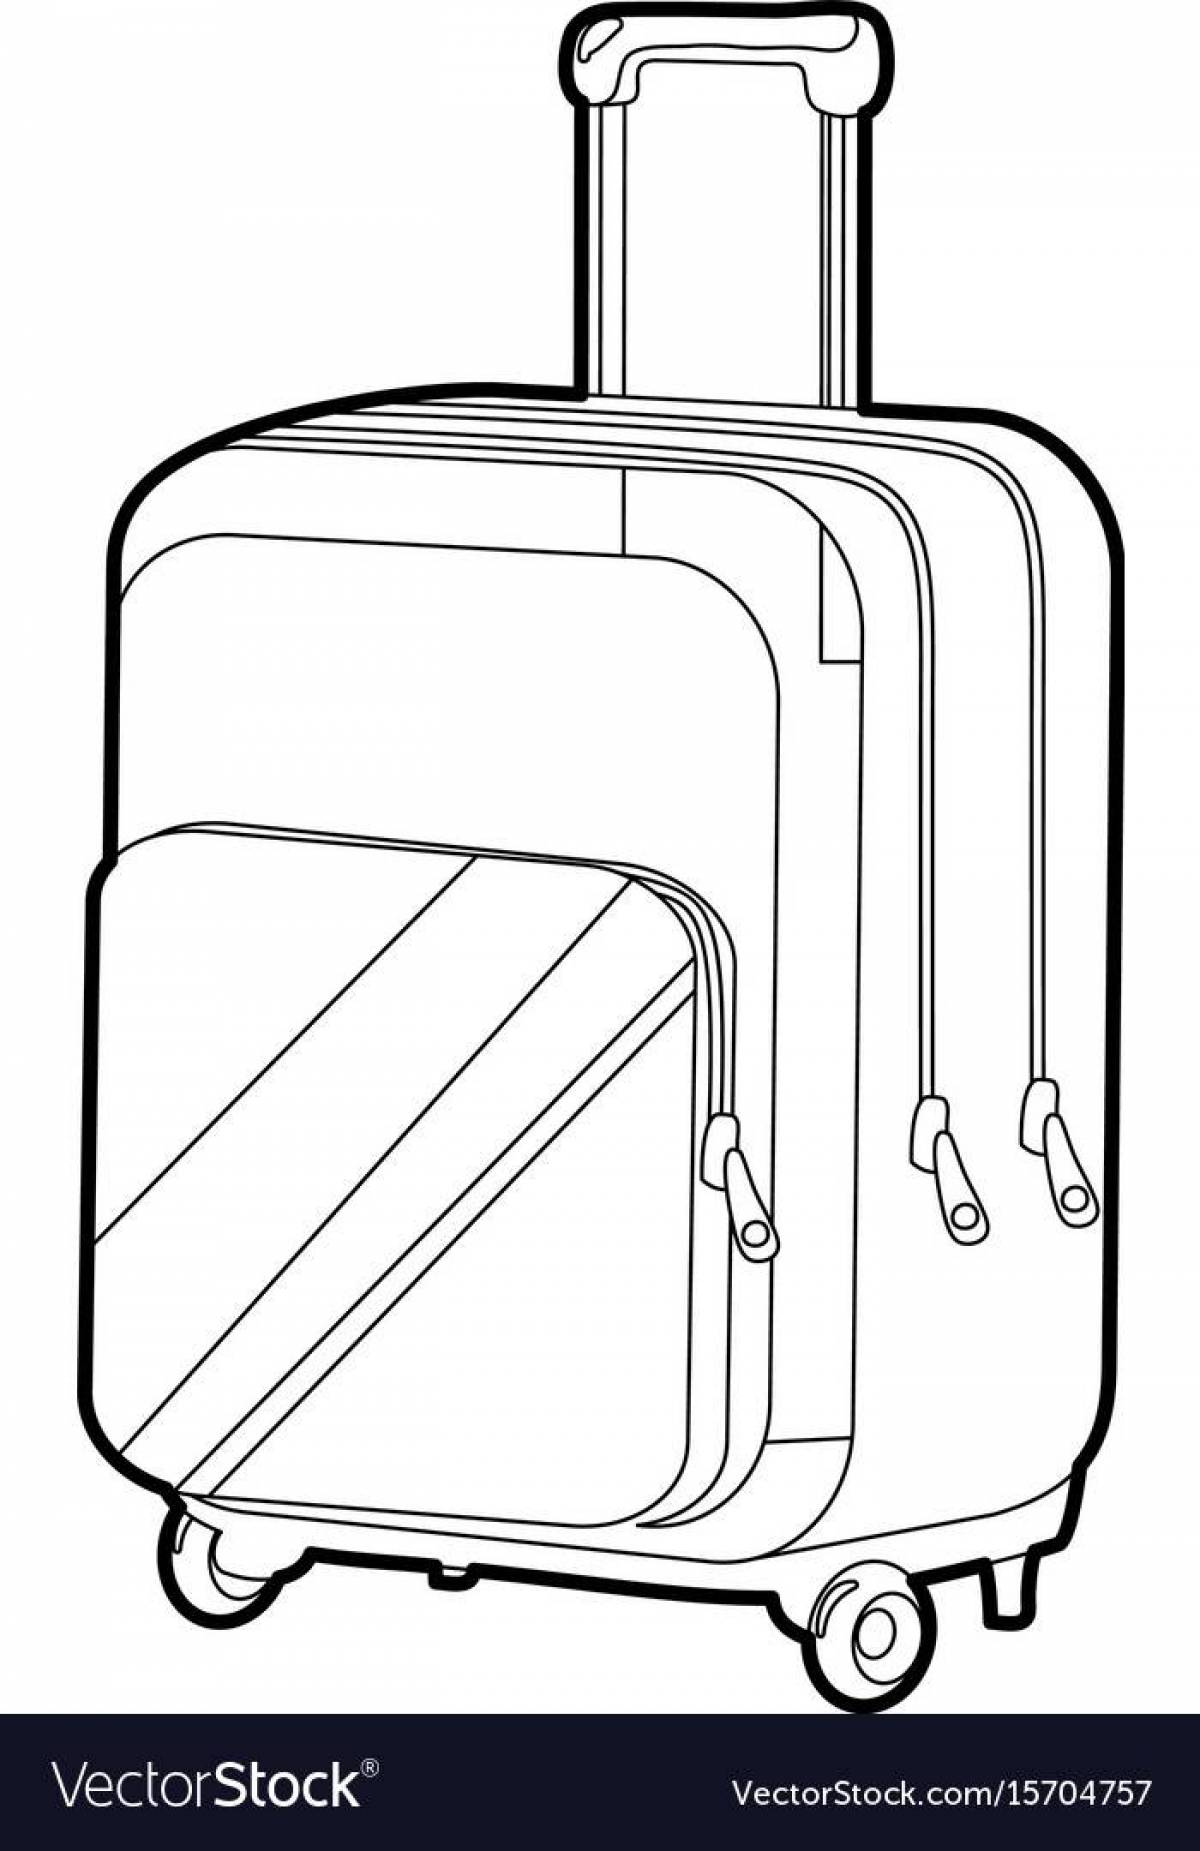 Playful suitcase coloring page